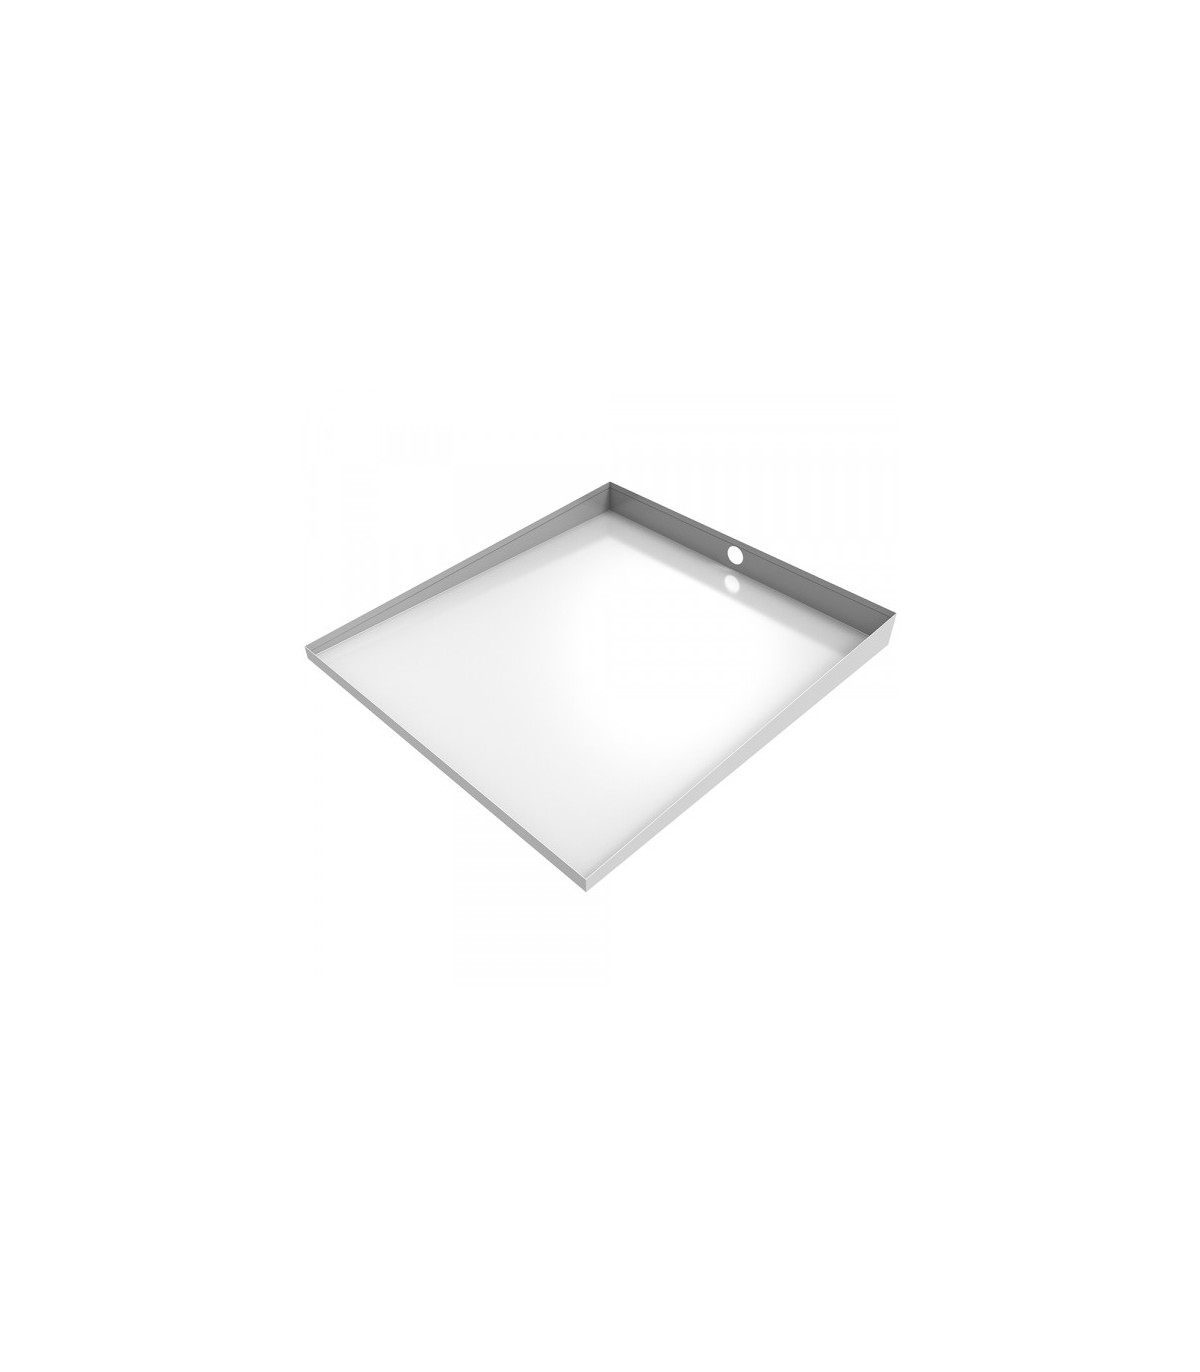 https://www.killarneymetals.com/11528-superlarge_default_2x/white-compact-front-load-floor-tray-with-drain---27-x-25---steel.jpg